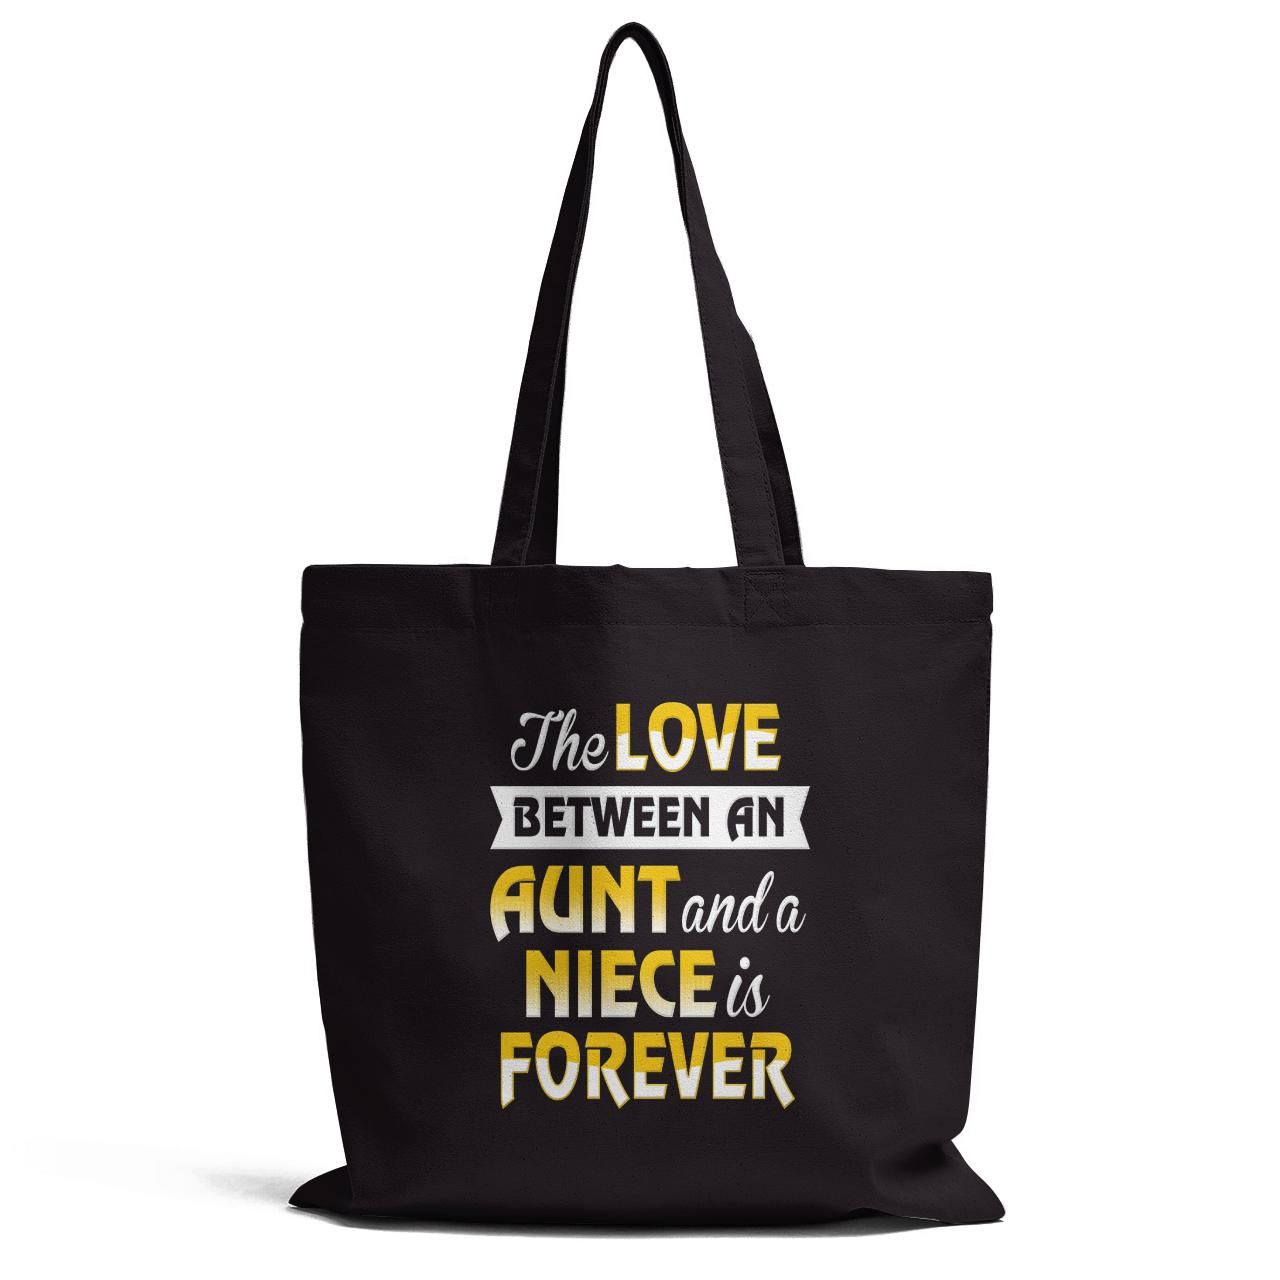 The Love Between An Aunt And A Niece Is Forever Tote Bag